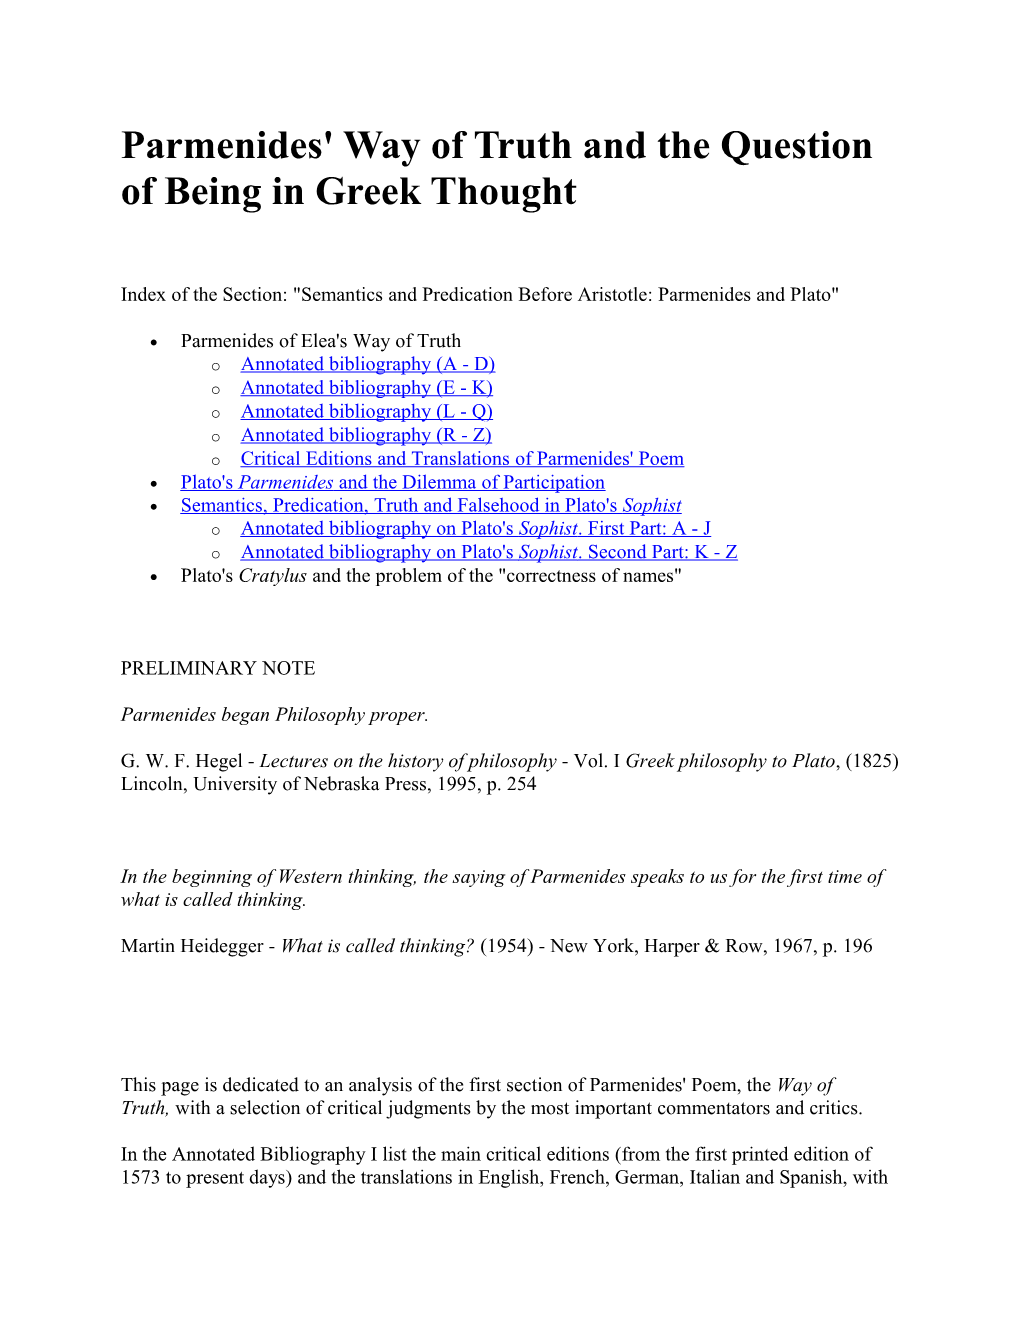 Parmenides' Way of Truth and the Question of Being in Greek Thought